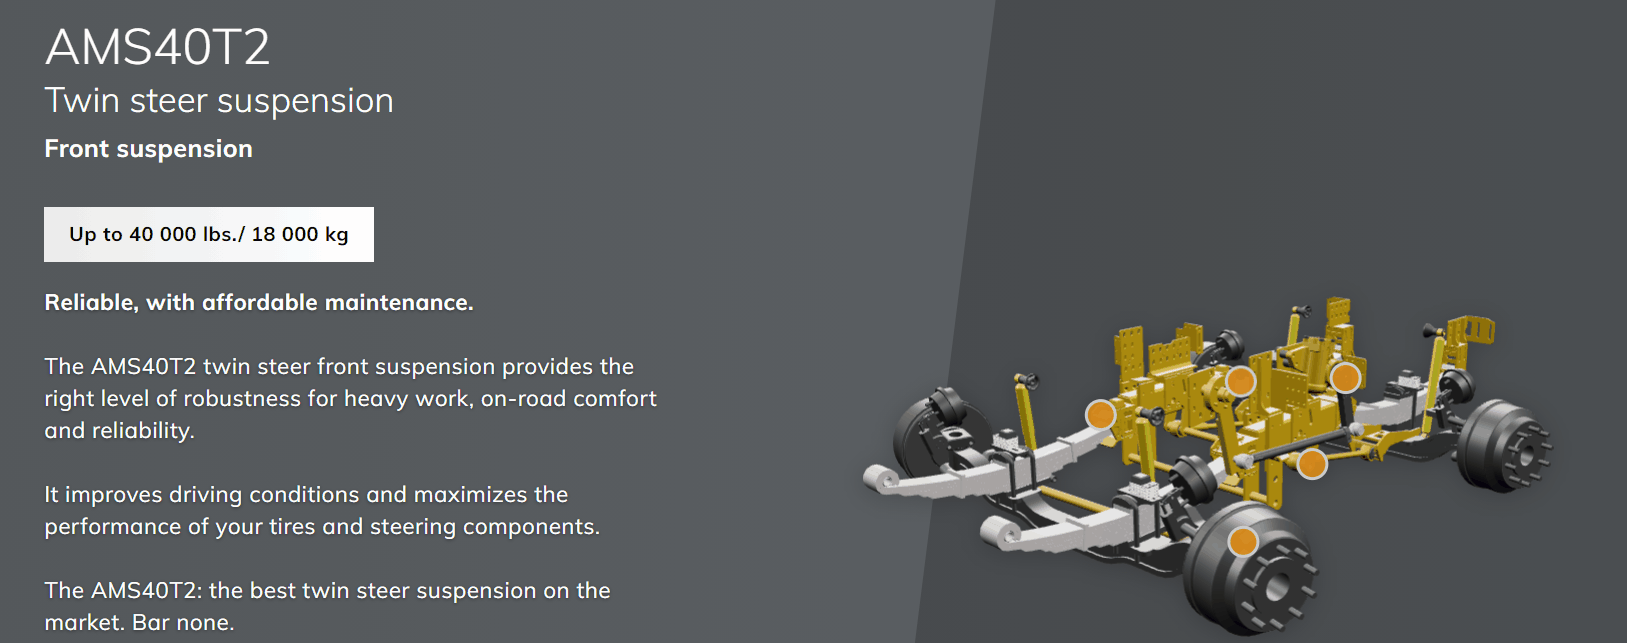 3D visualization of a truck suspension